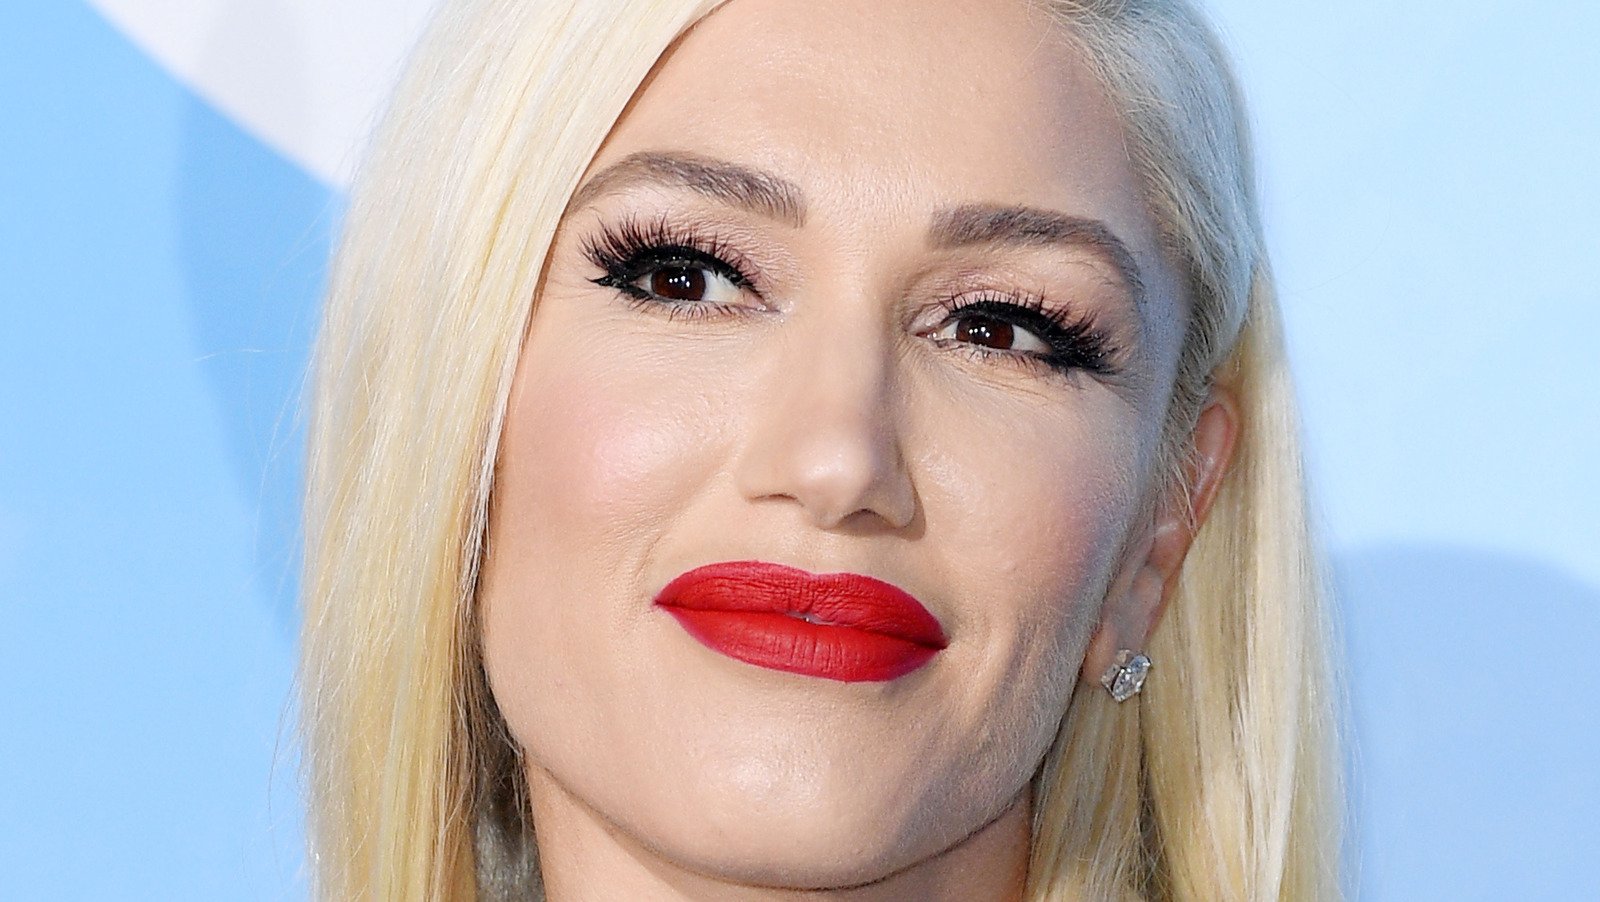 Gwen Stefani's New Music Video Is Causing Fans To See Red. Here's Why